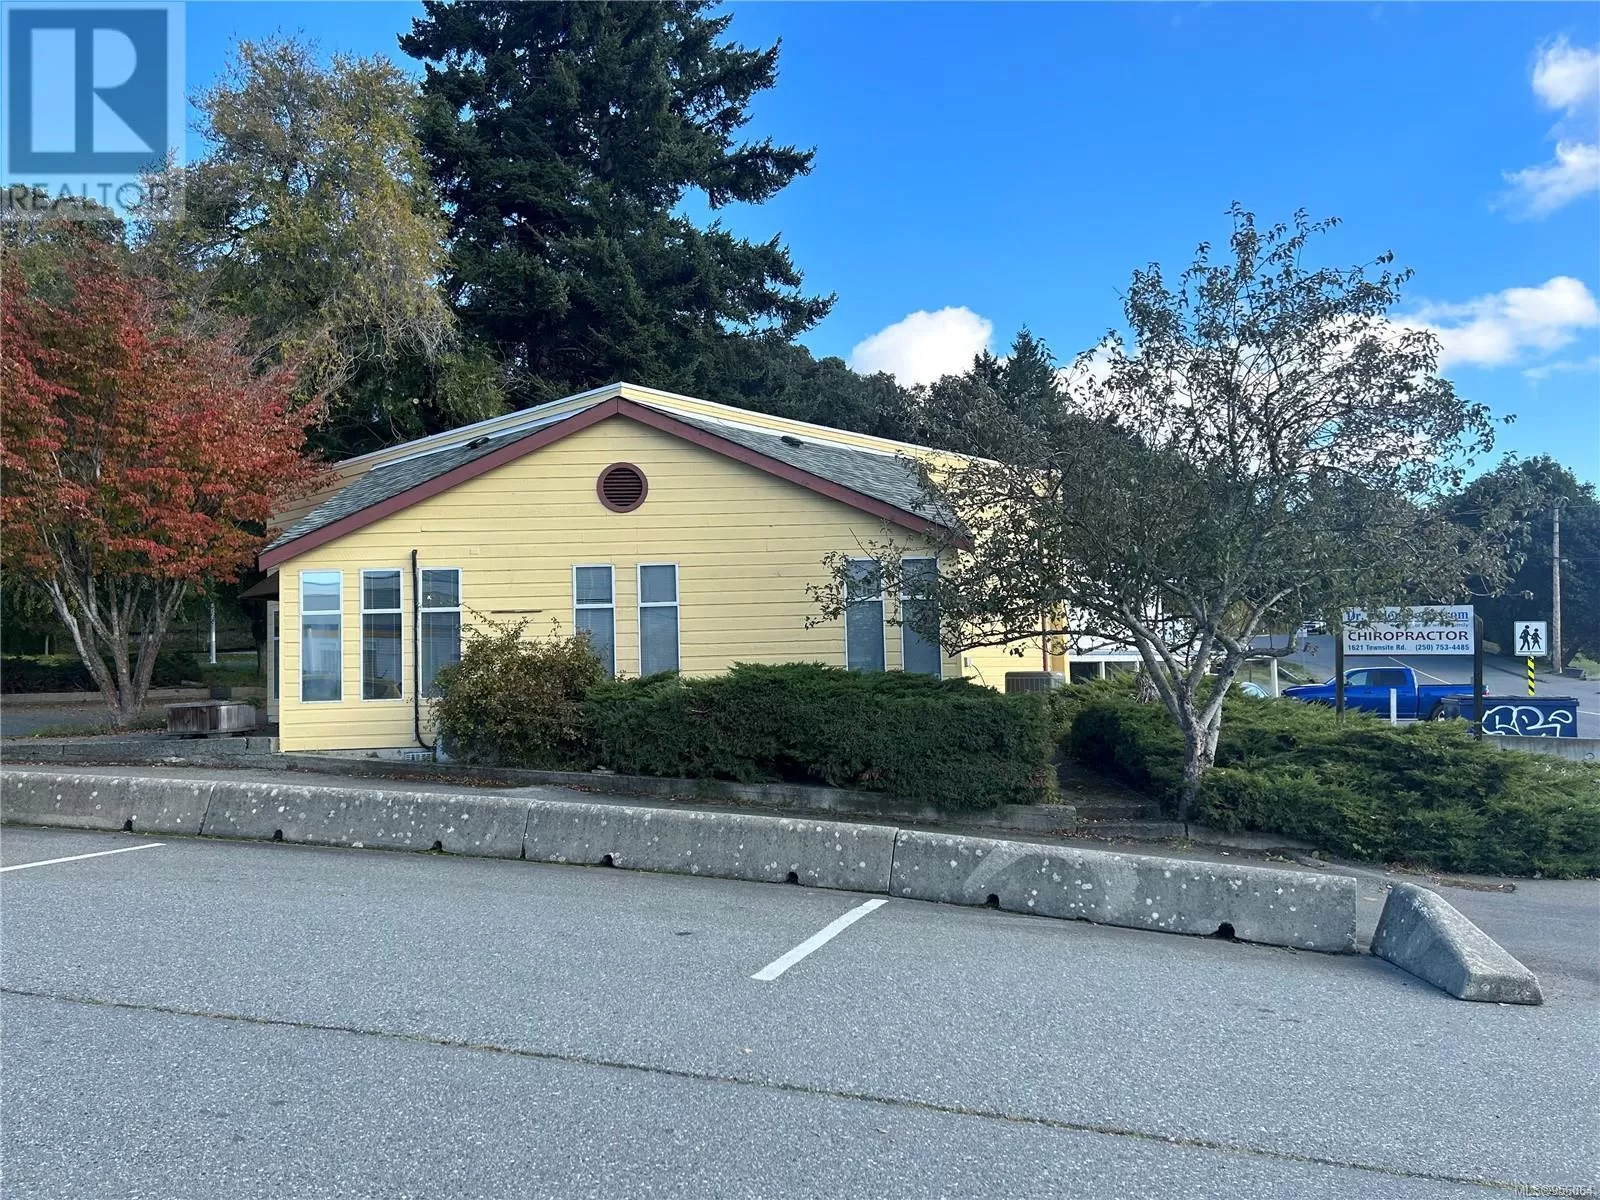 Commercial Mix for rent: 1621 Townsite Rd, Nanaimo, British Columbia V9S 1N3